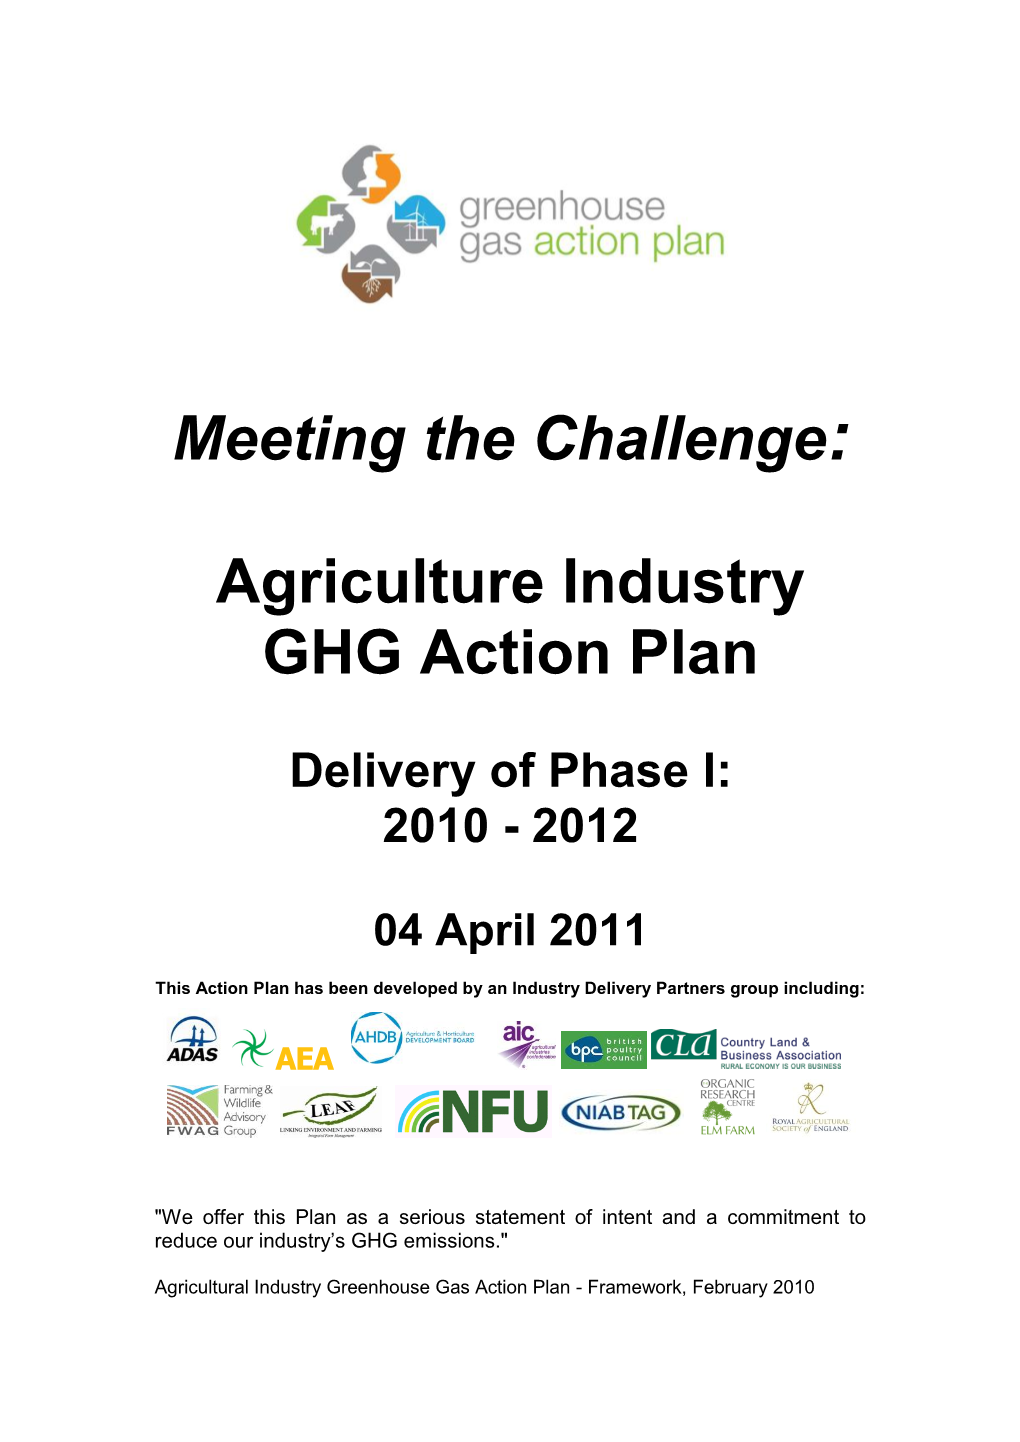 Meeting the Challenge: Agriculture Industry GHG Action Plan